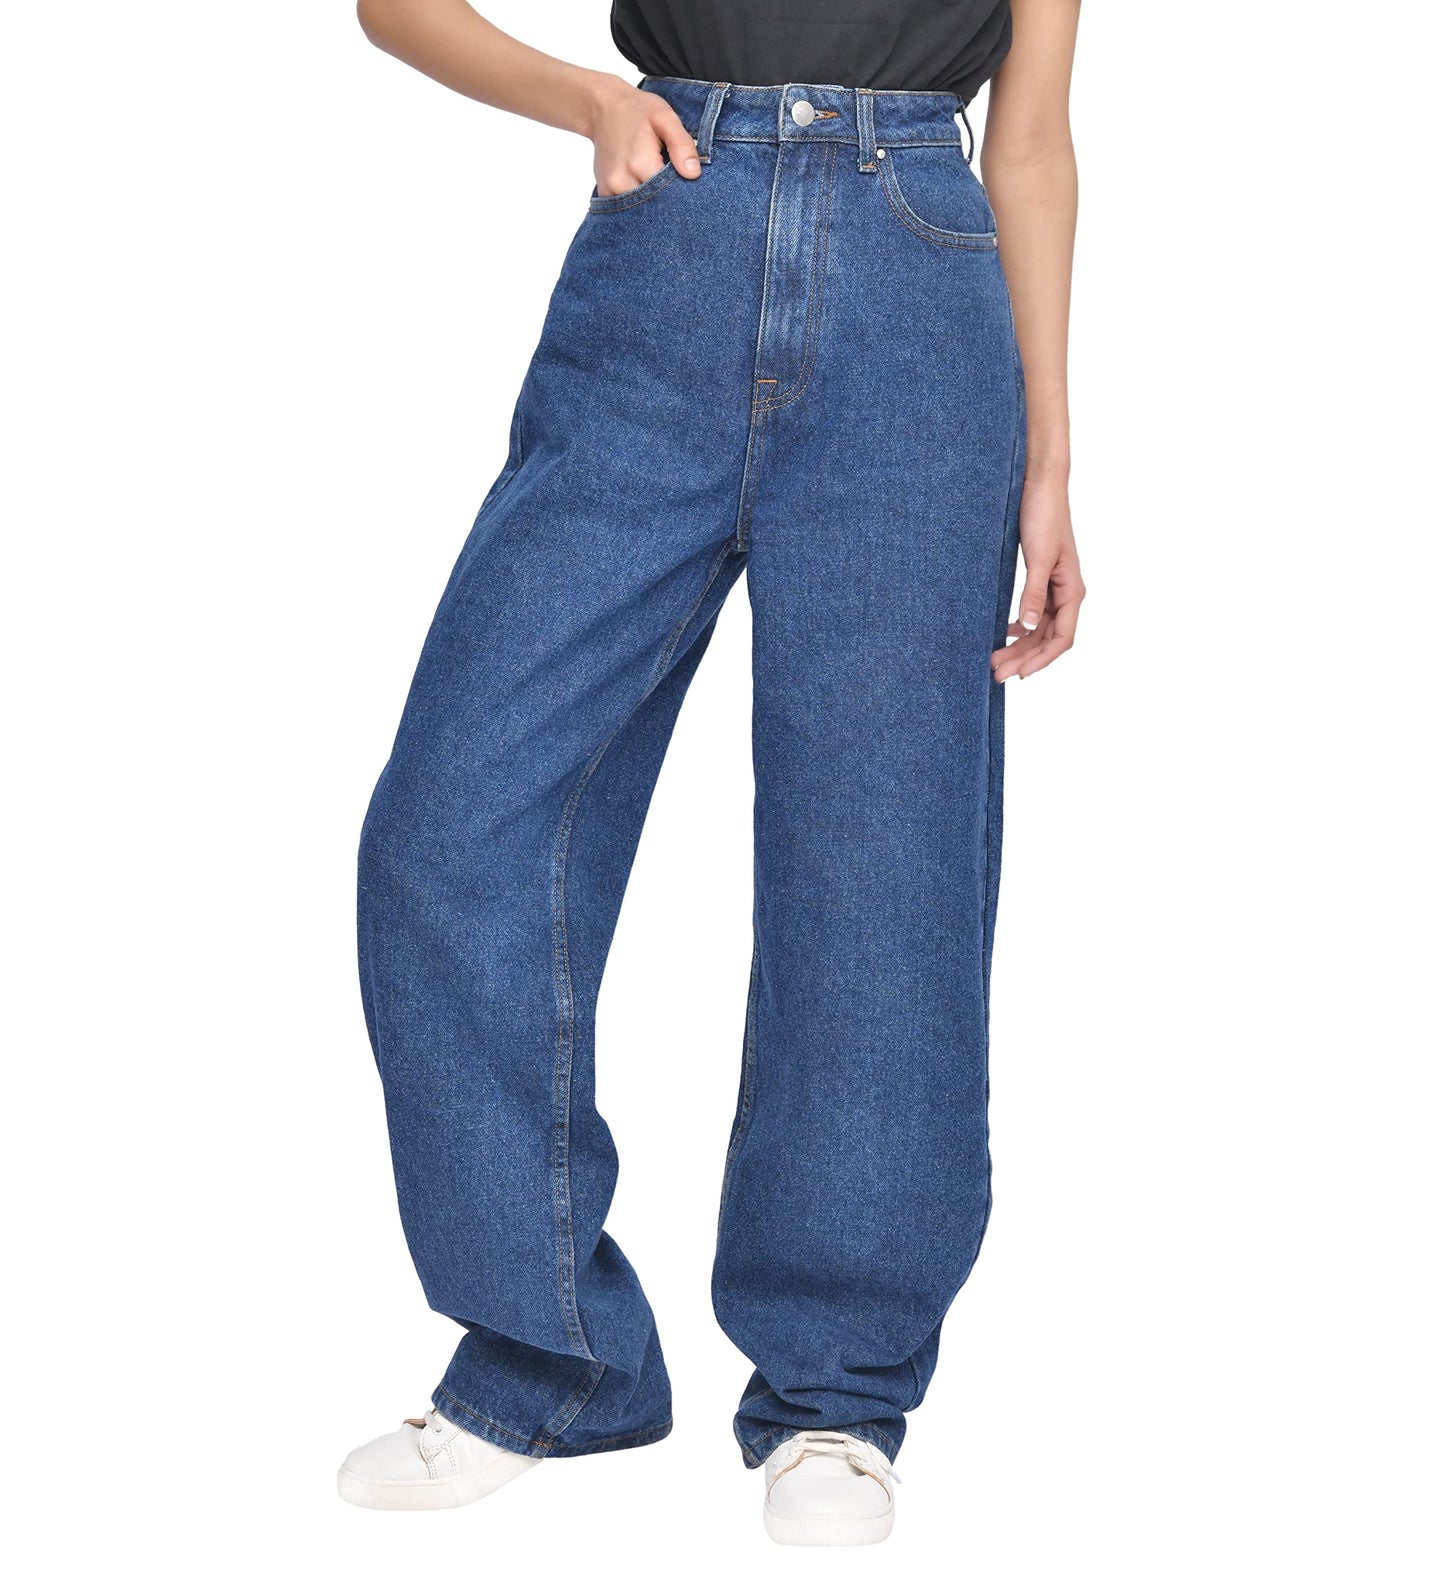 90s Wide Leg, High Waisted - Jeans